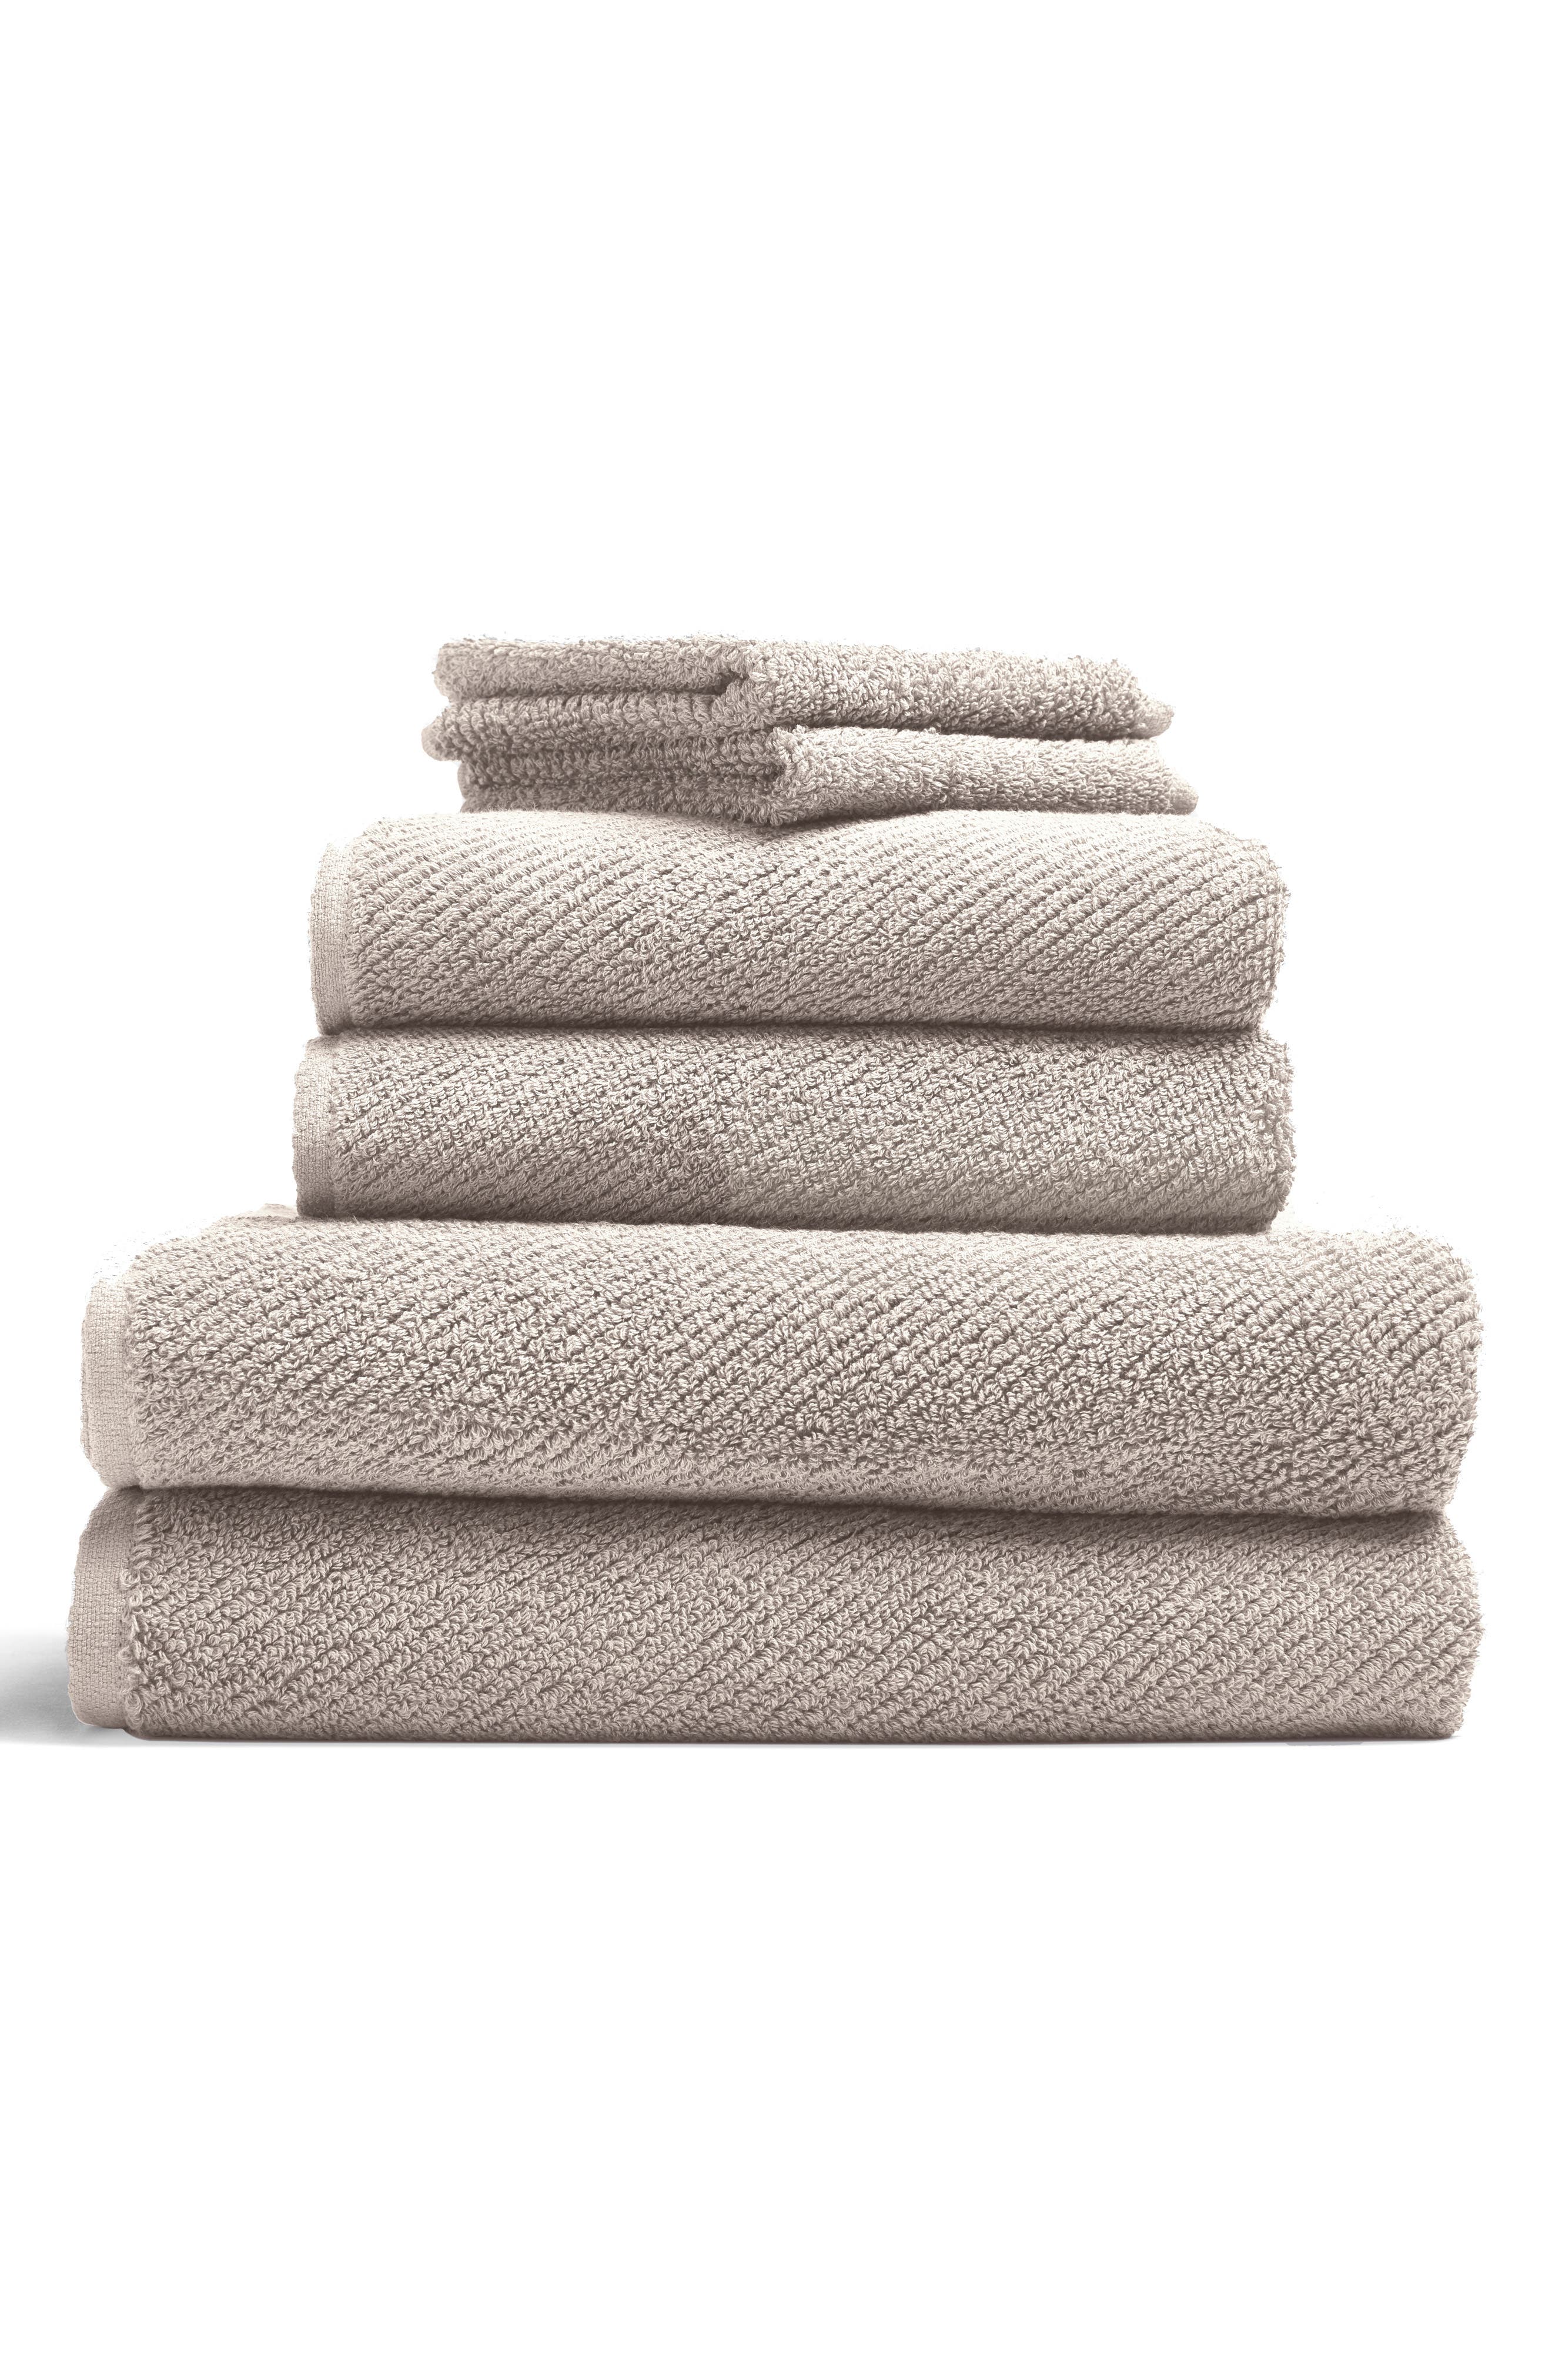 Coyuchi Air Weight(R) Organic Cotton Guest Towel in Dune